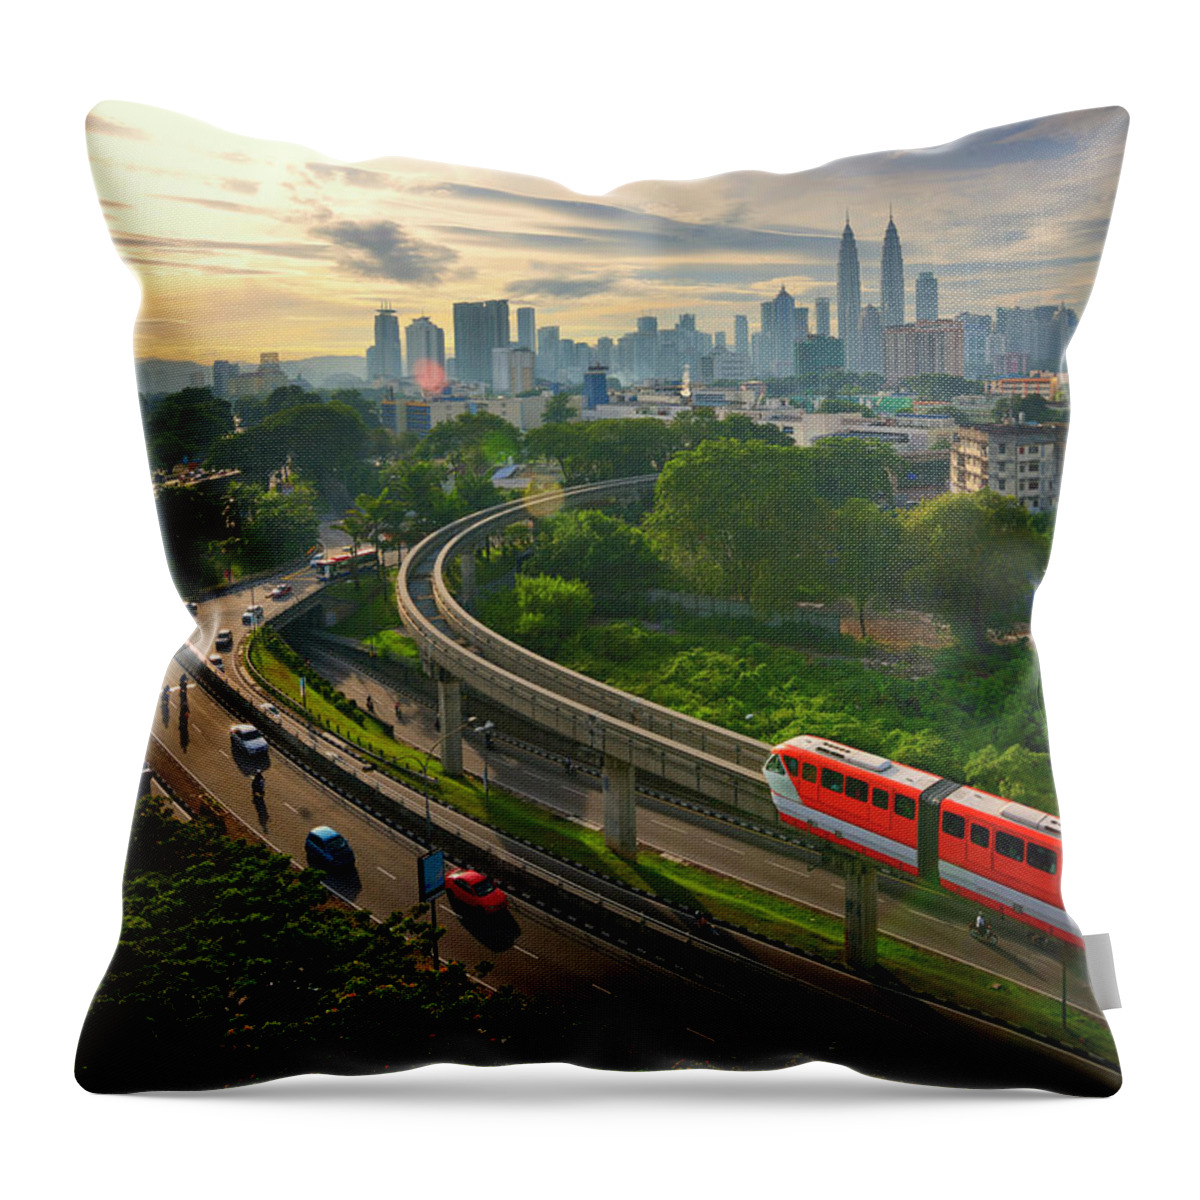 Train Throw Pillow featuring the photograph Malaysia - Kuala Lumpur City by By Toonman